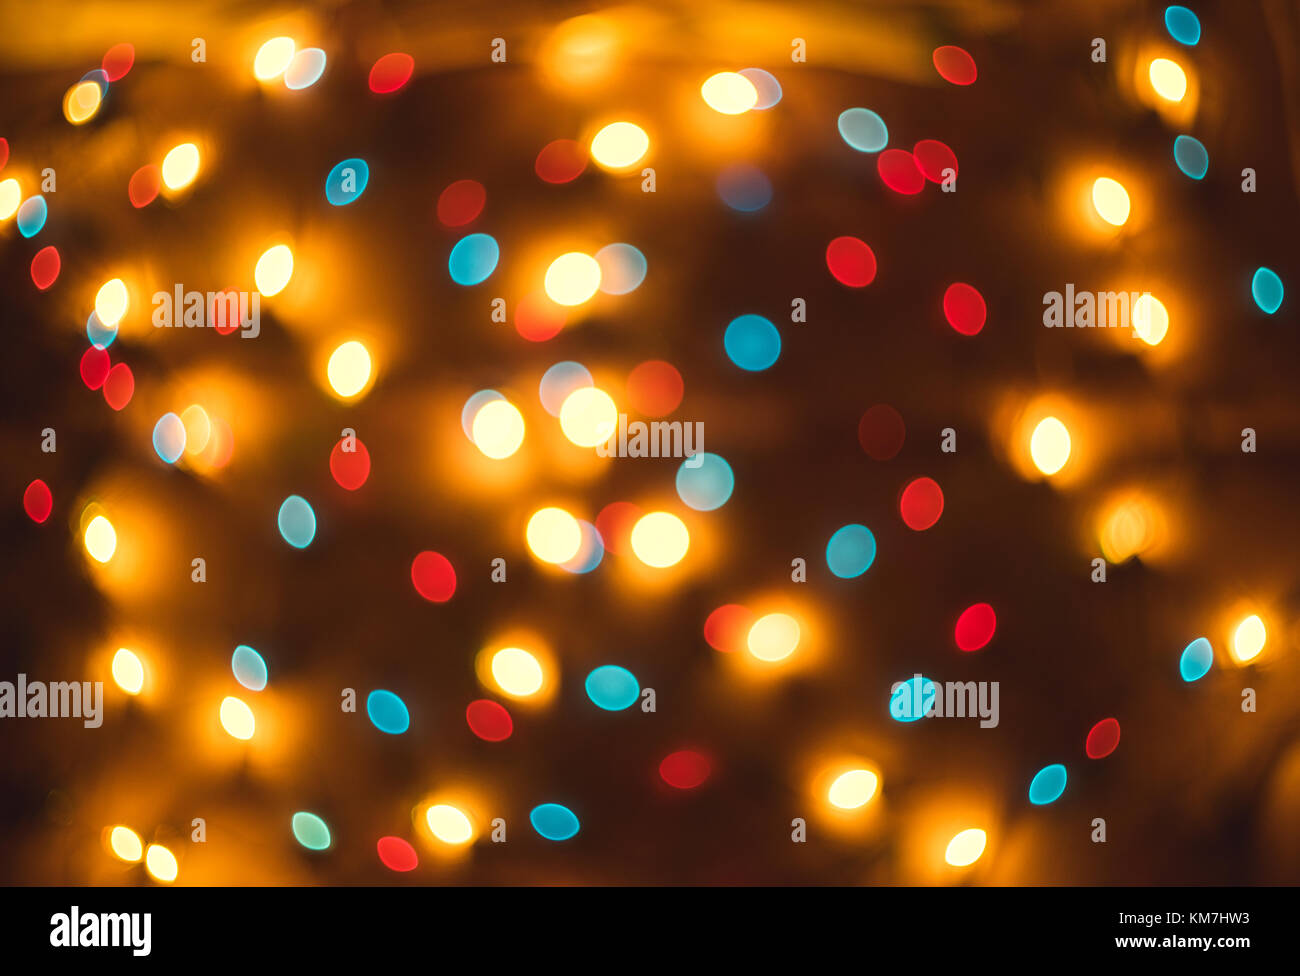 Bokeh. New Year bokeh background. Christmas abstract background with colorful bokeh defocused lights for holiday design. Concept. Blurred garland Stock Photo